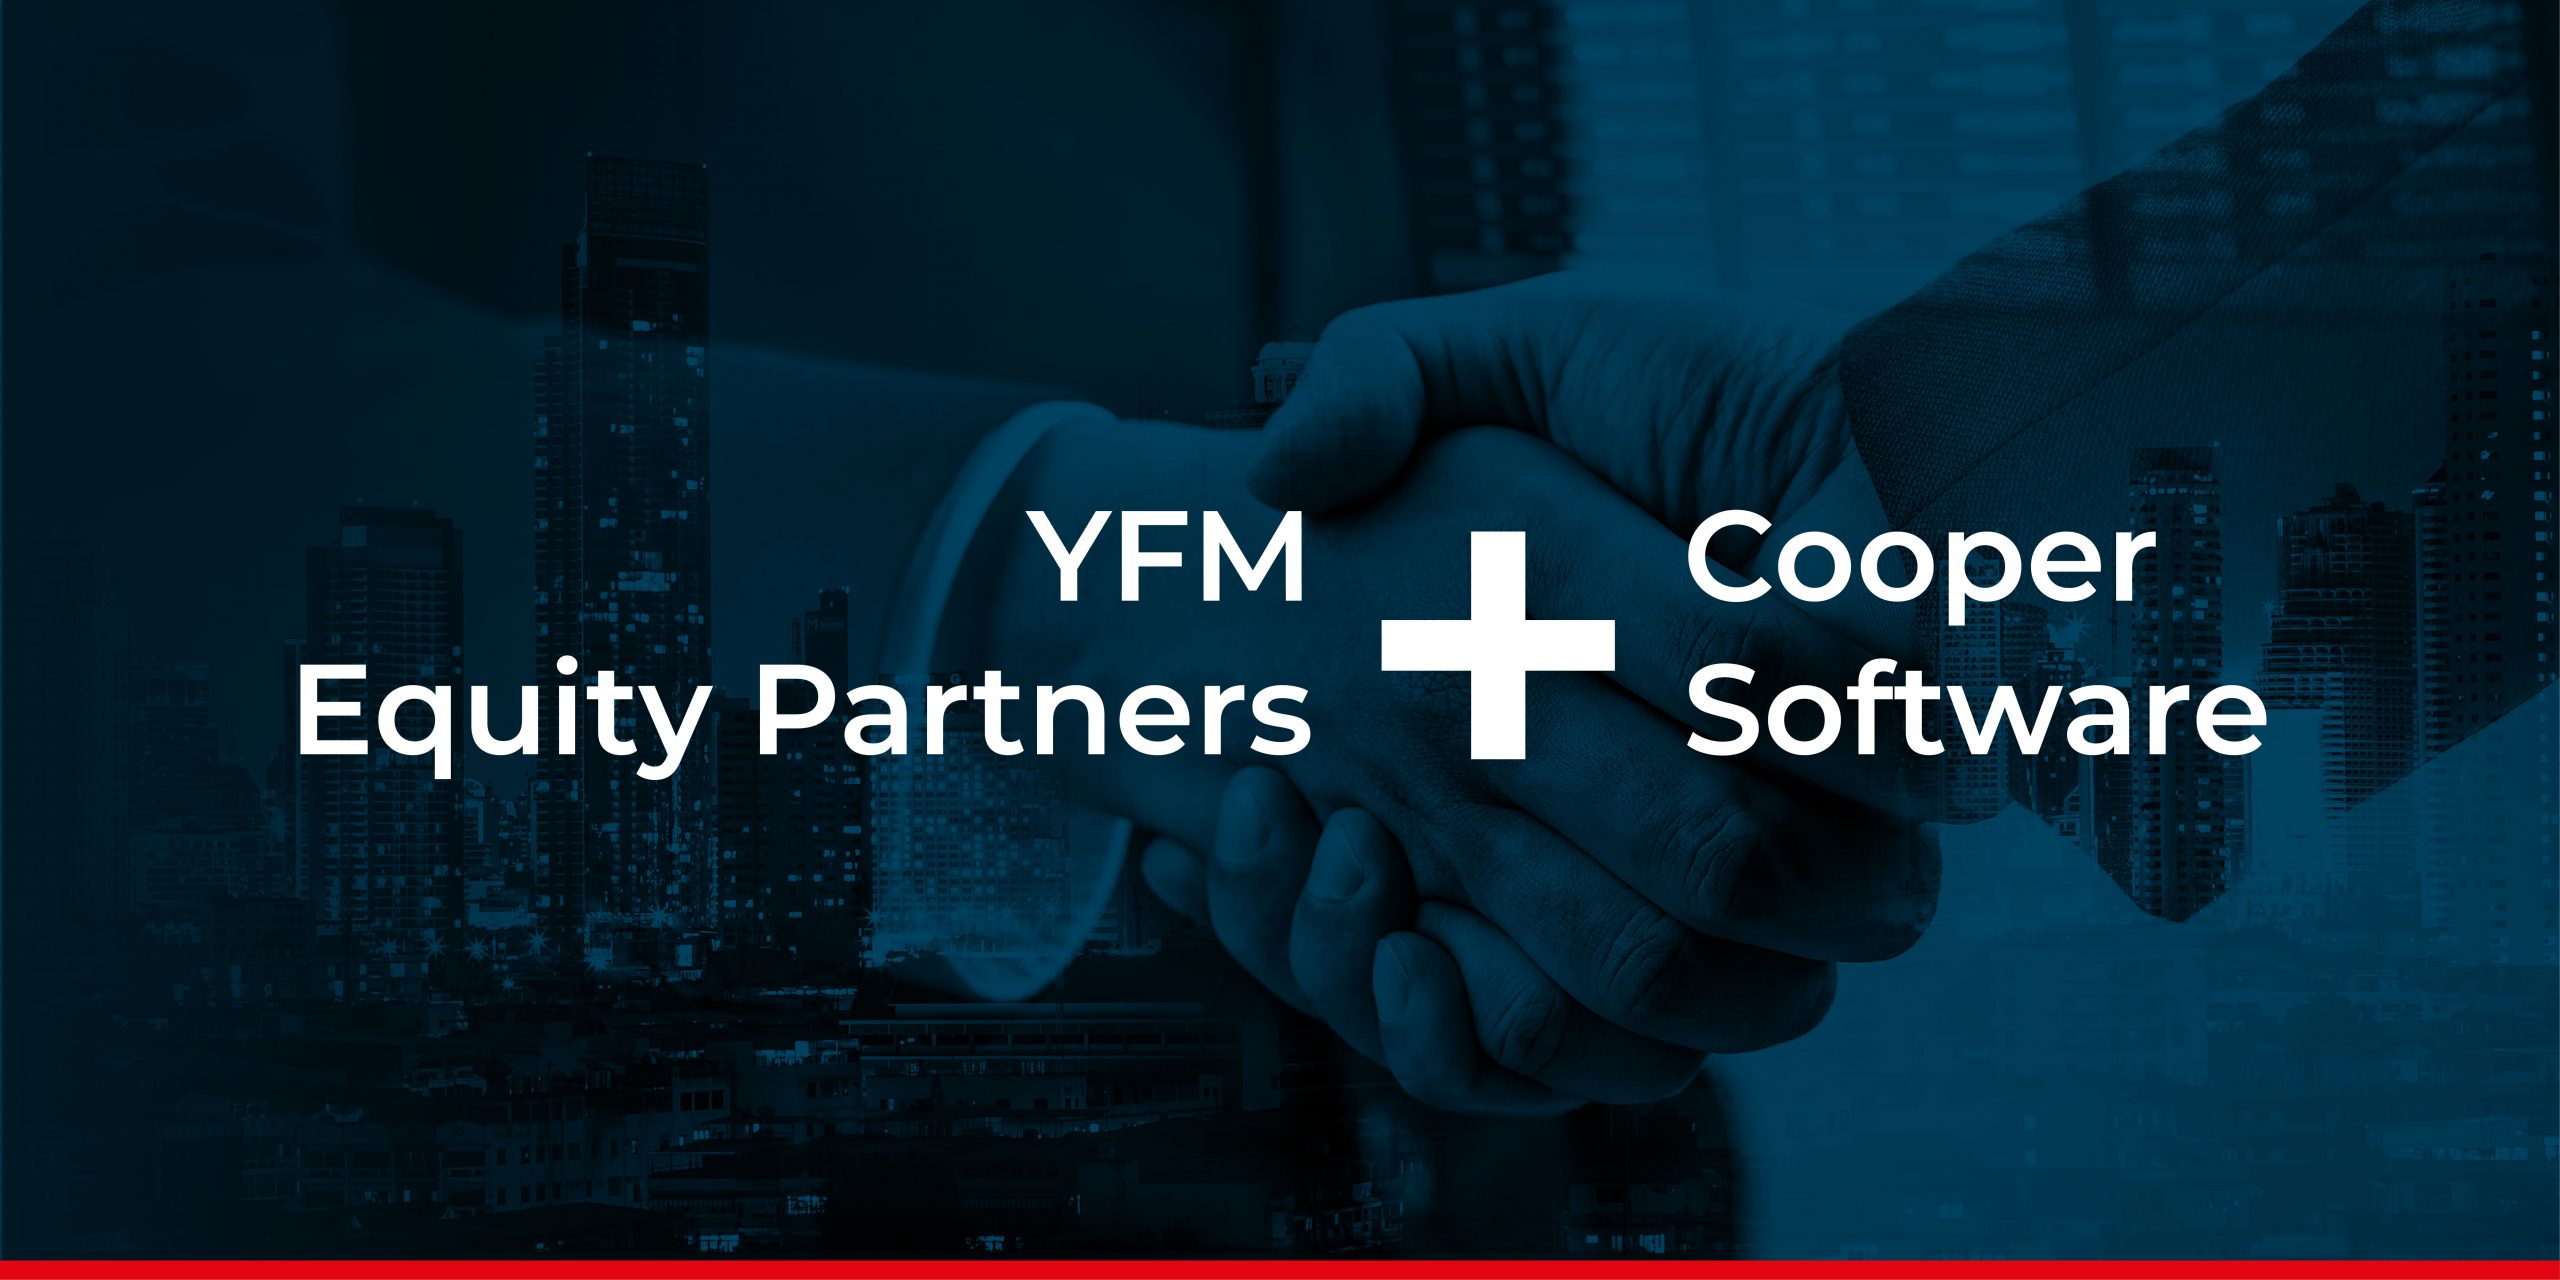 Beyond M&A supports YFM Equity Partners’ investment in global ERP software specialist, Cooper Software Ltd.